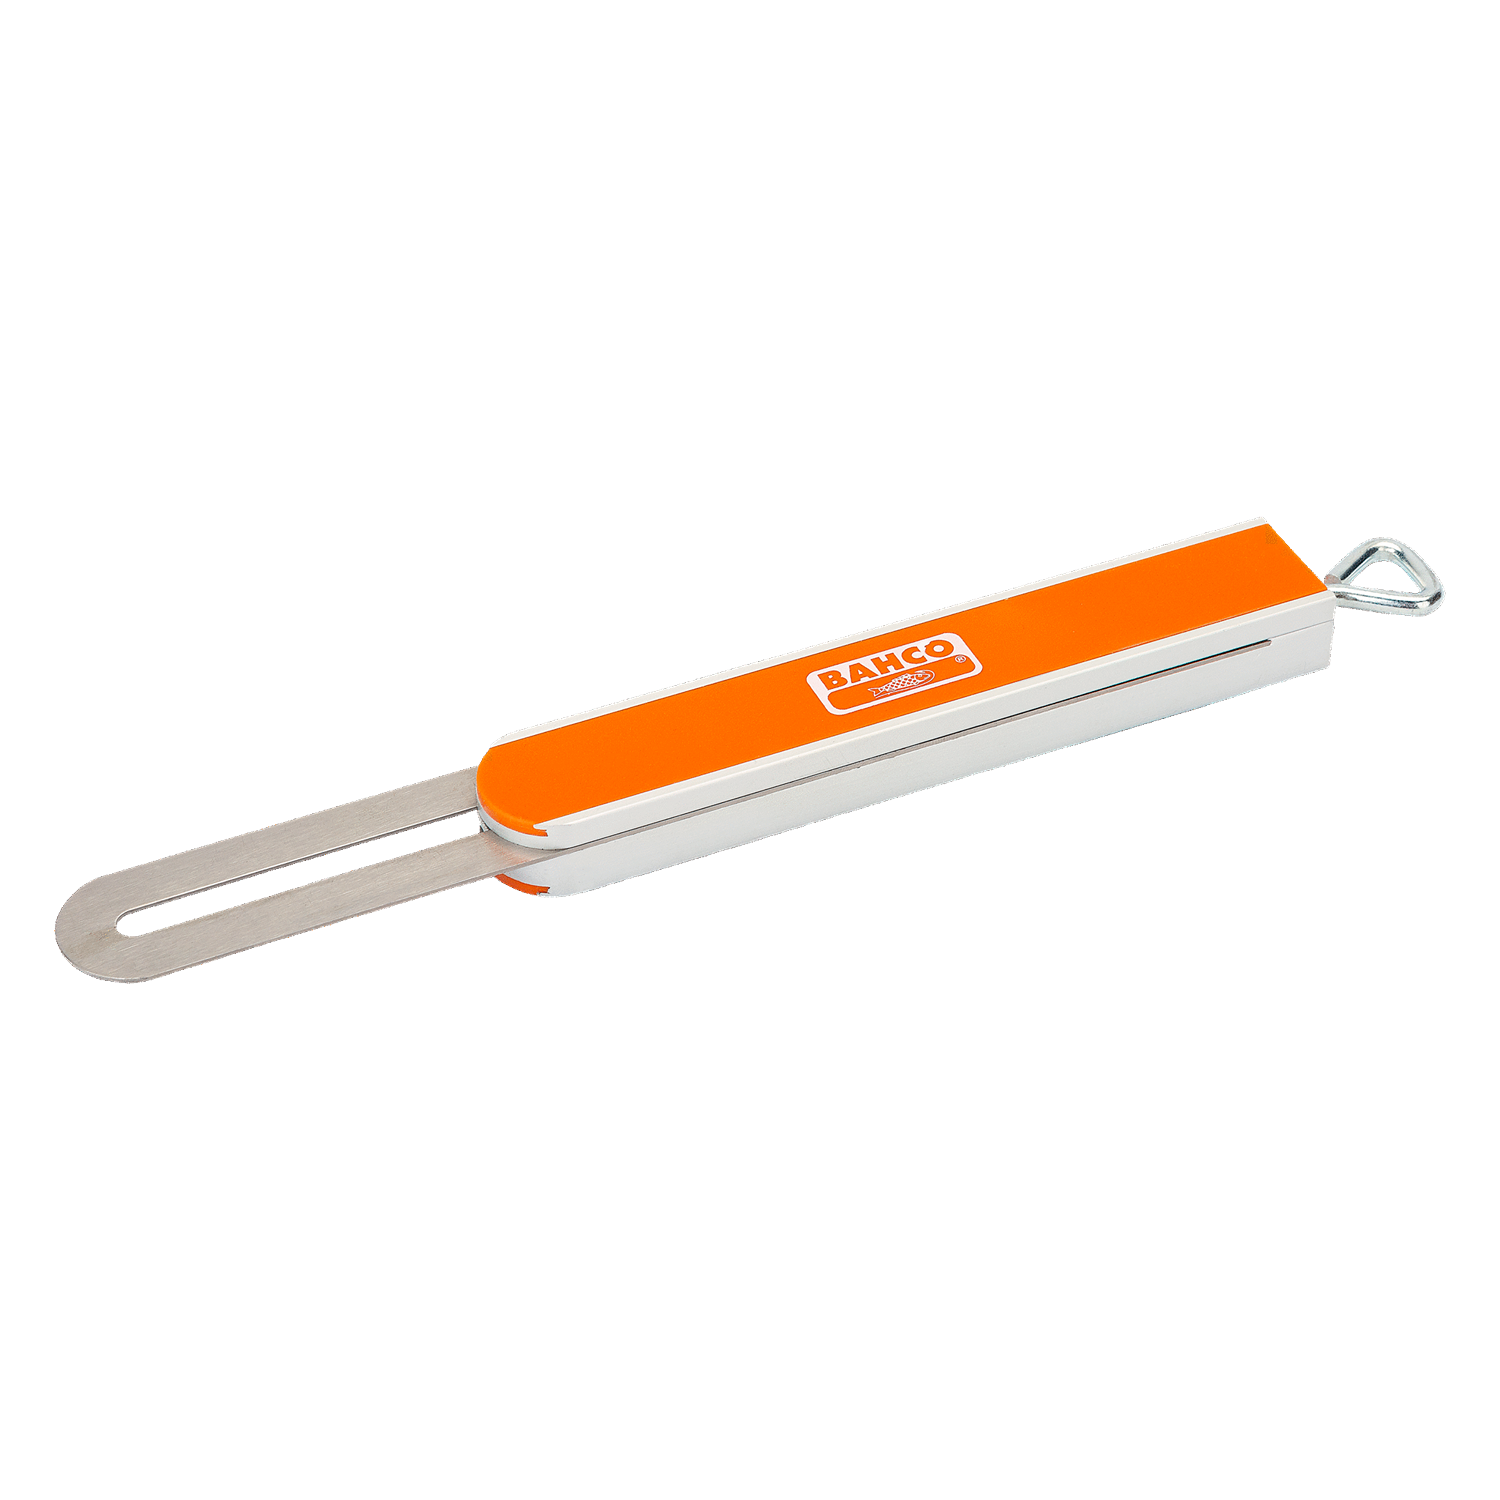 BAHCO 9574 Bevel Square with Steel Blade (BAHCO Tools) - Premium Bevel Square from BAHCO - Shop now at Yew Aik.